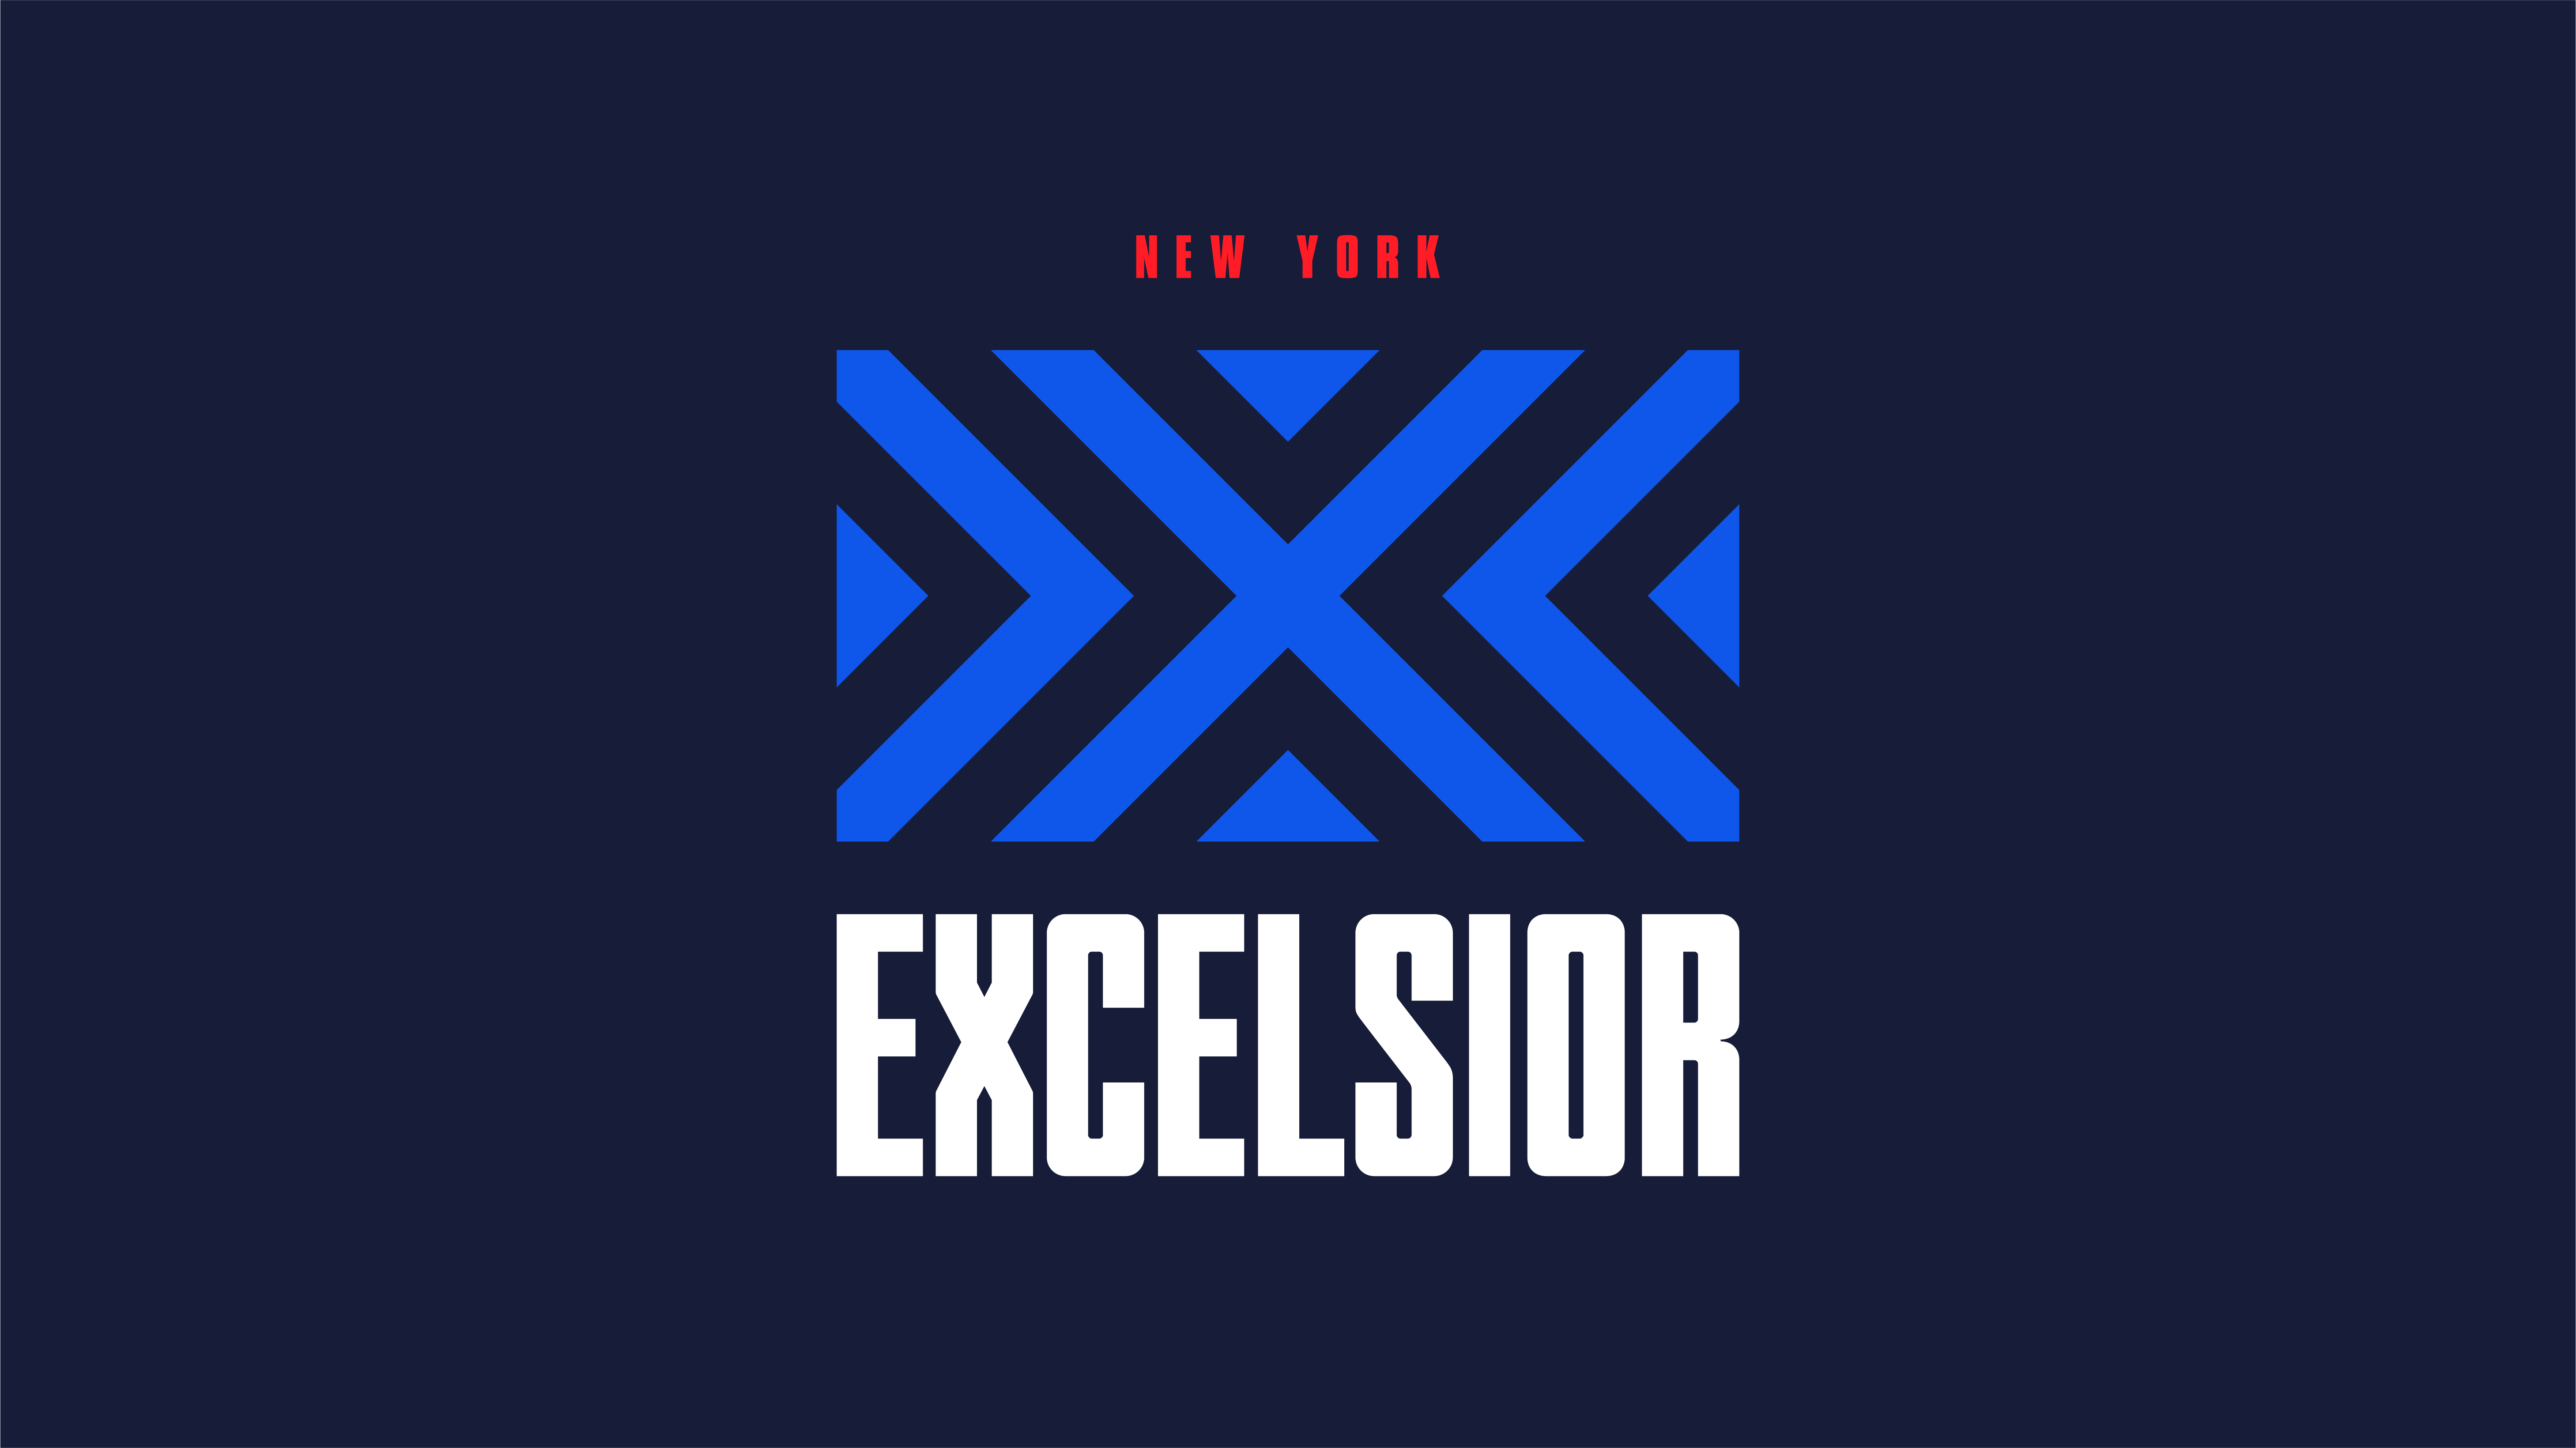 Excelsior Logo - The story behind New York Excelsior's one-of-a-kind logo | Dot Esports